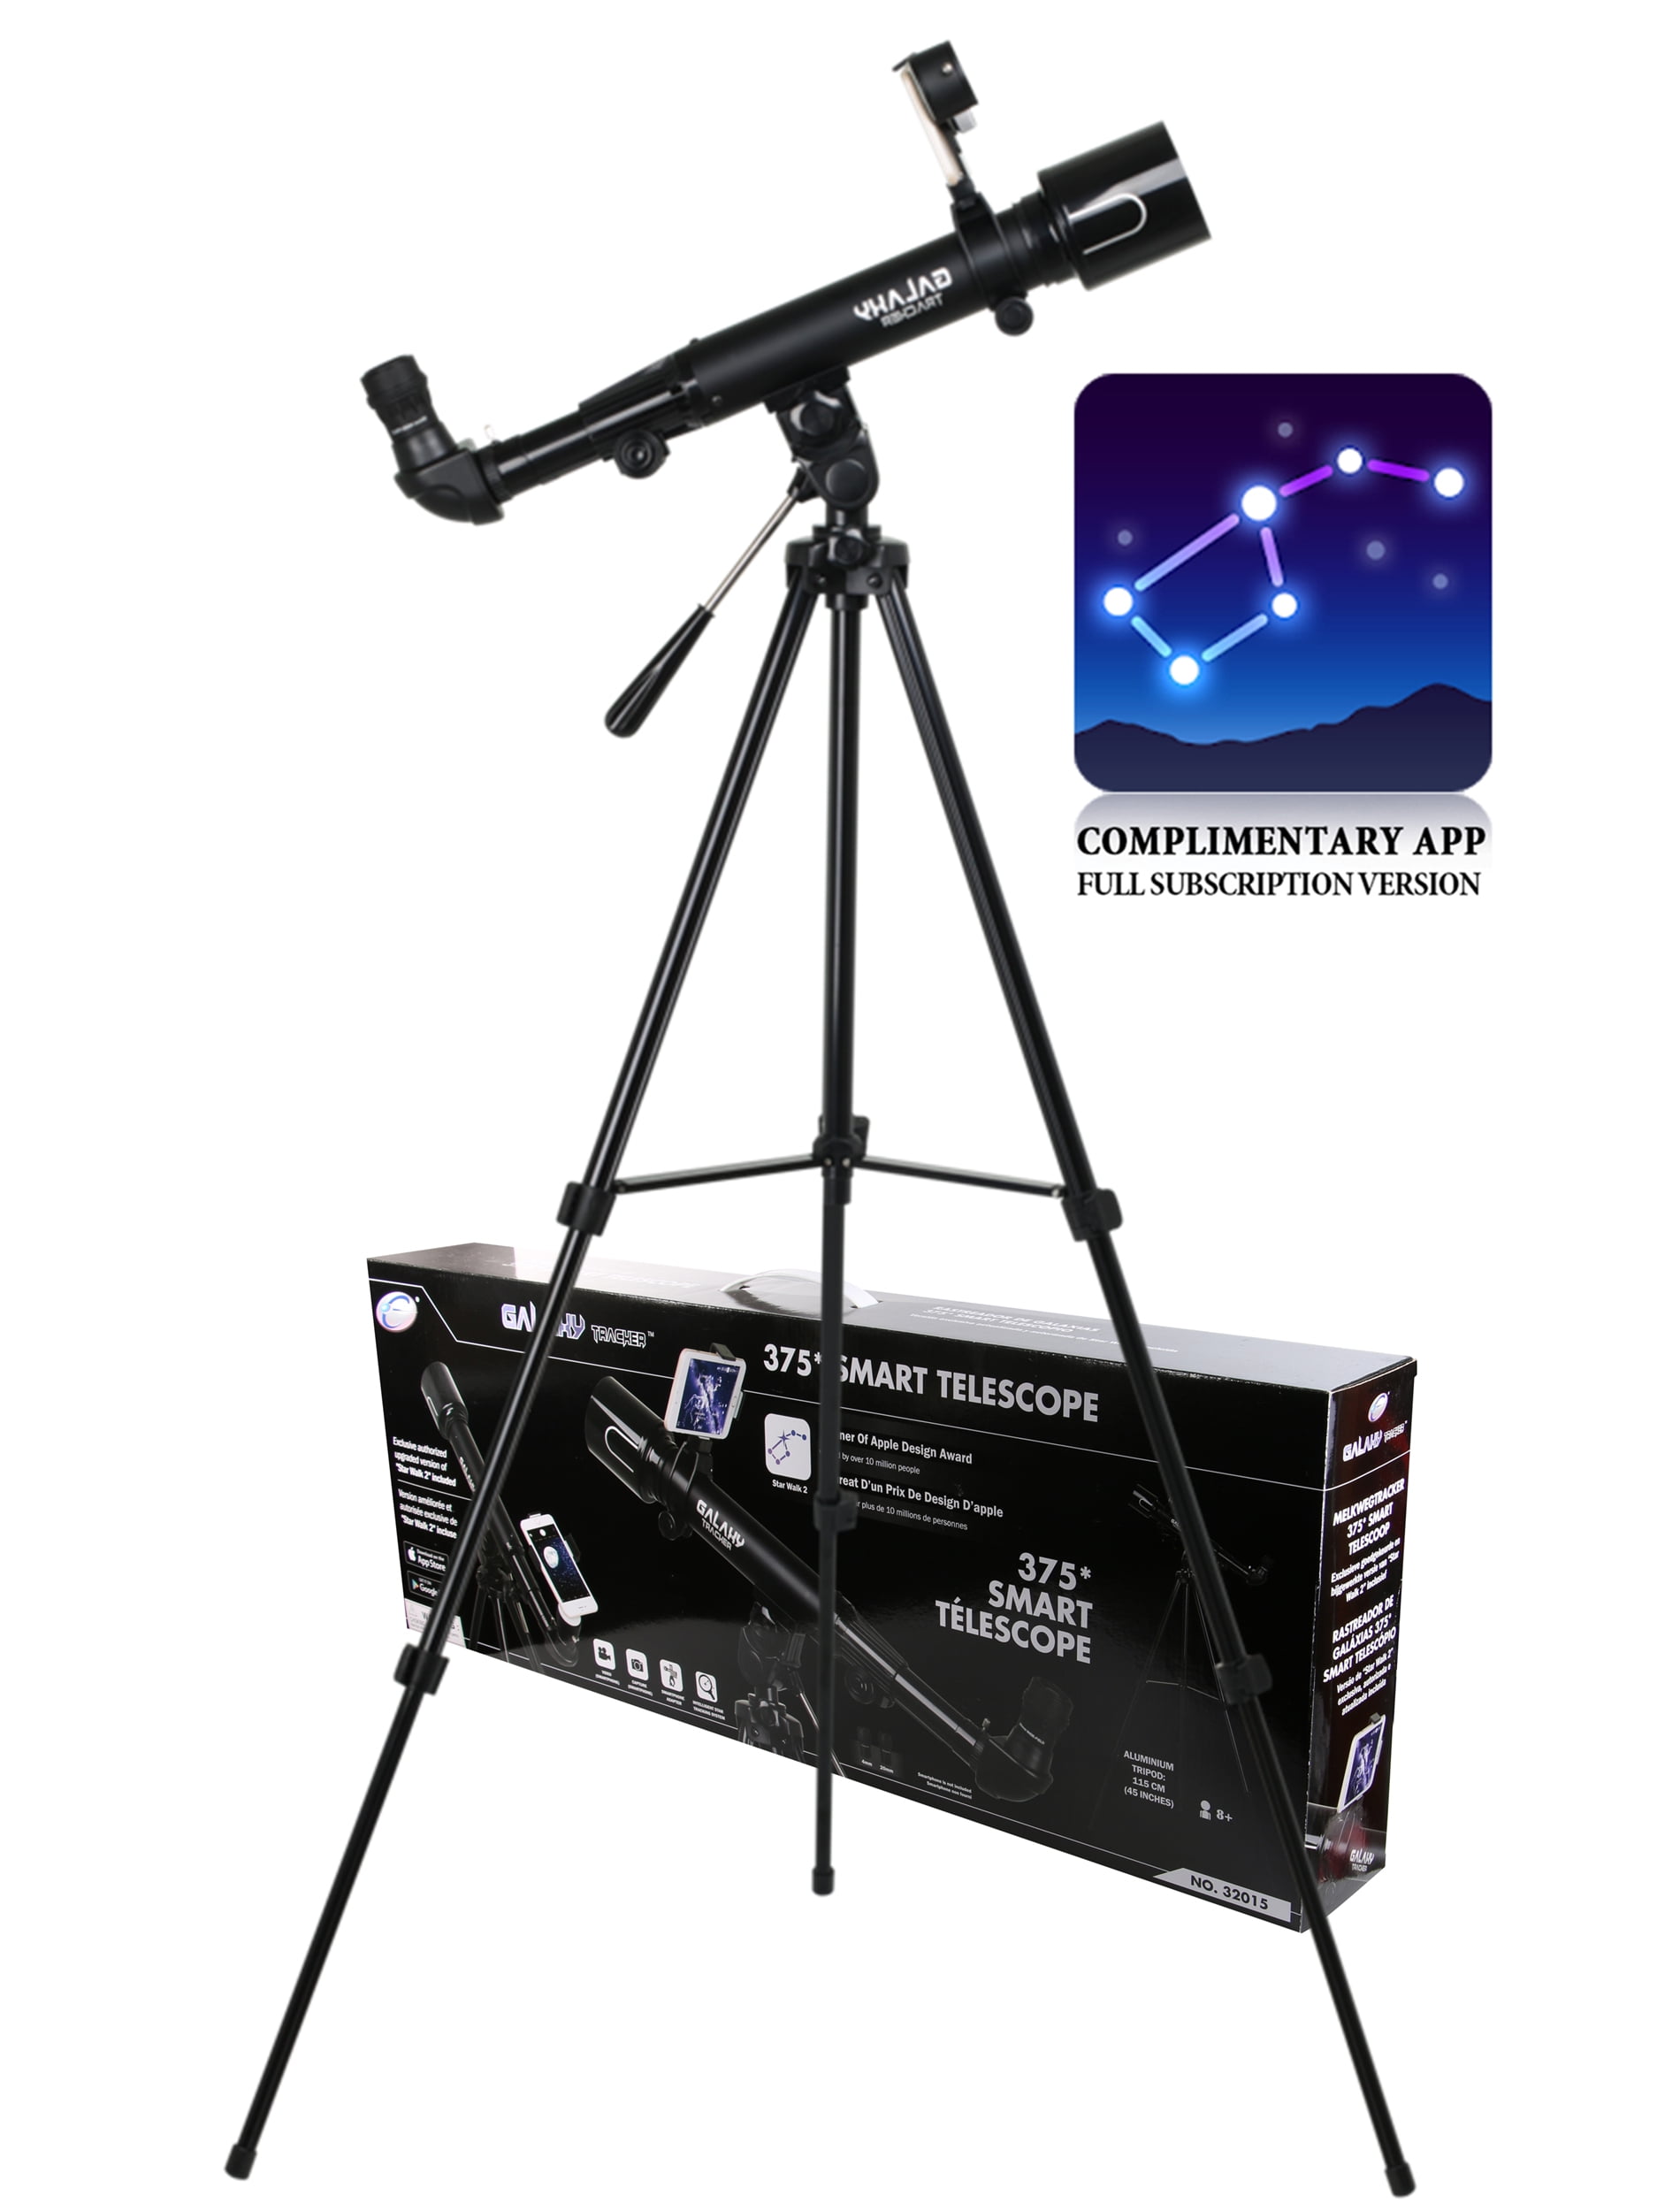 SZRWD Kids Telescopes,Professional 90X Astronomical Landscape Telescope with Tripod & 2 Magnification Eyepieces Telescope for Kids Beginners to Explore Space Moon Nature